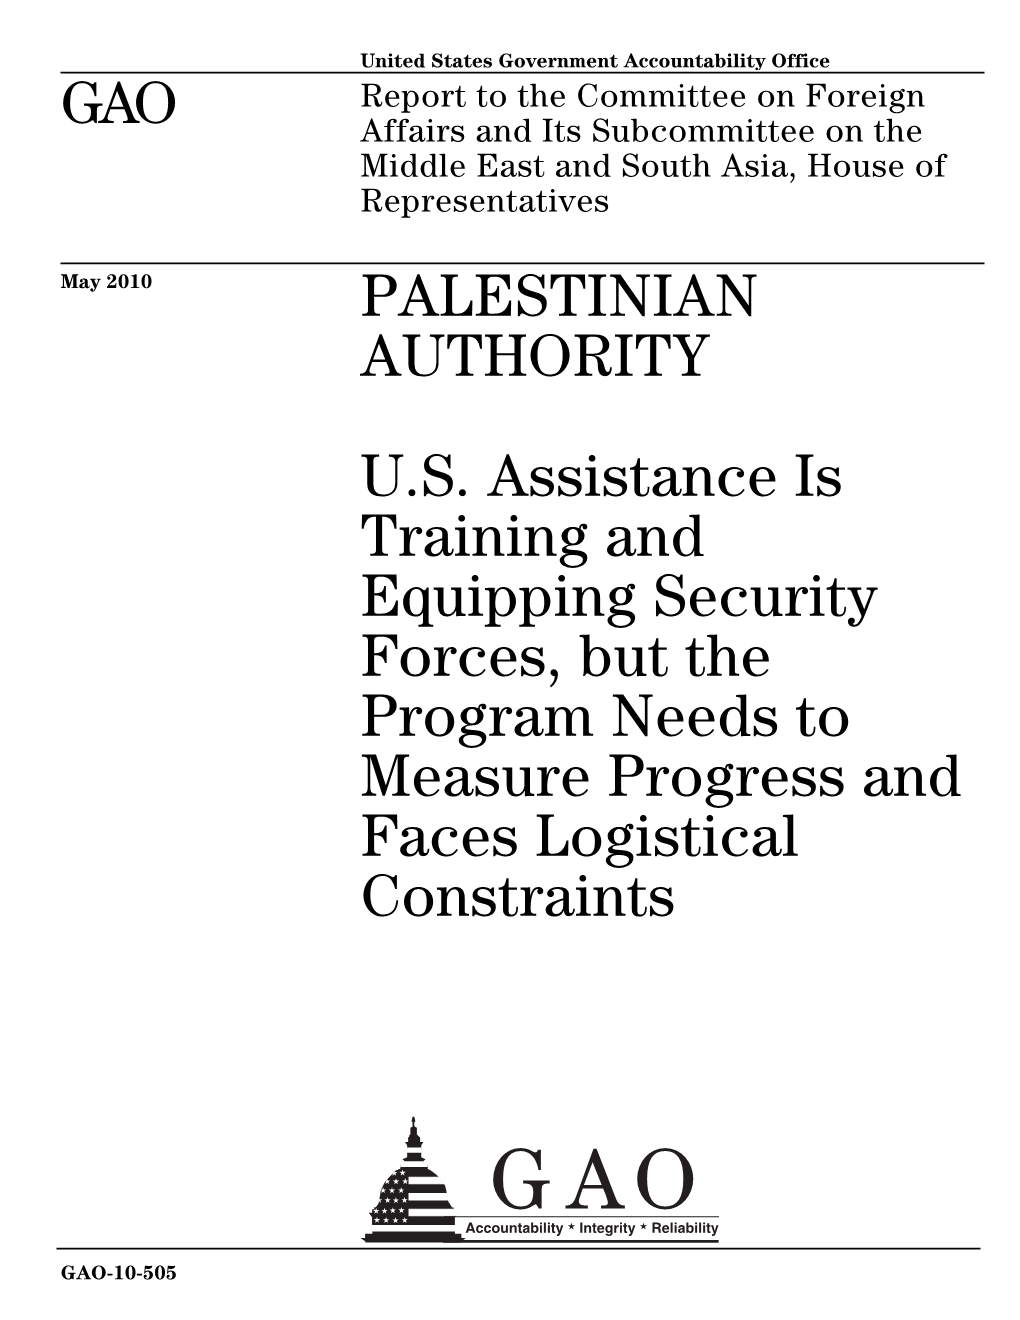 GAO-10-505 Palestinian Authority: U.S. Assistance Is Training And